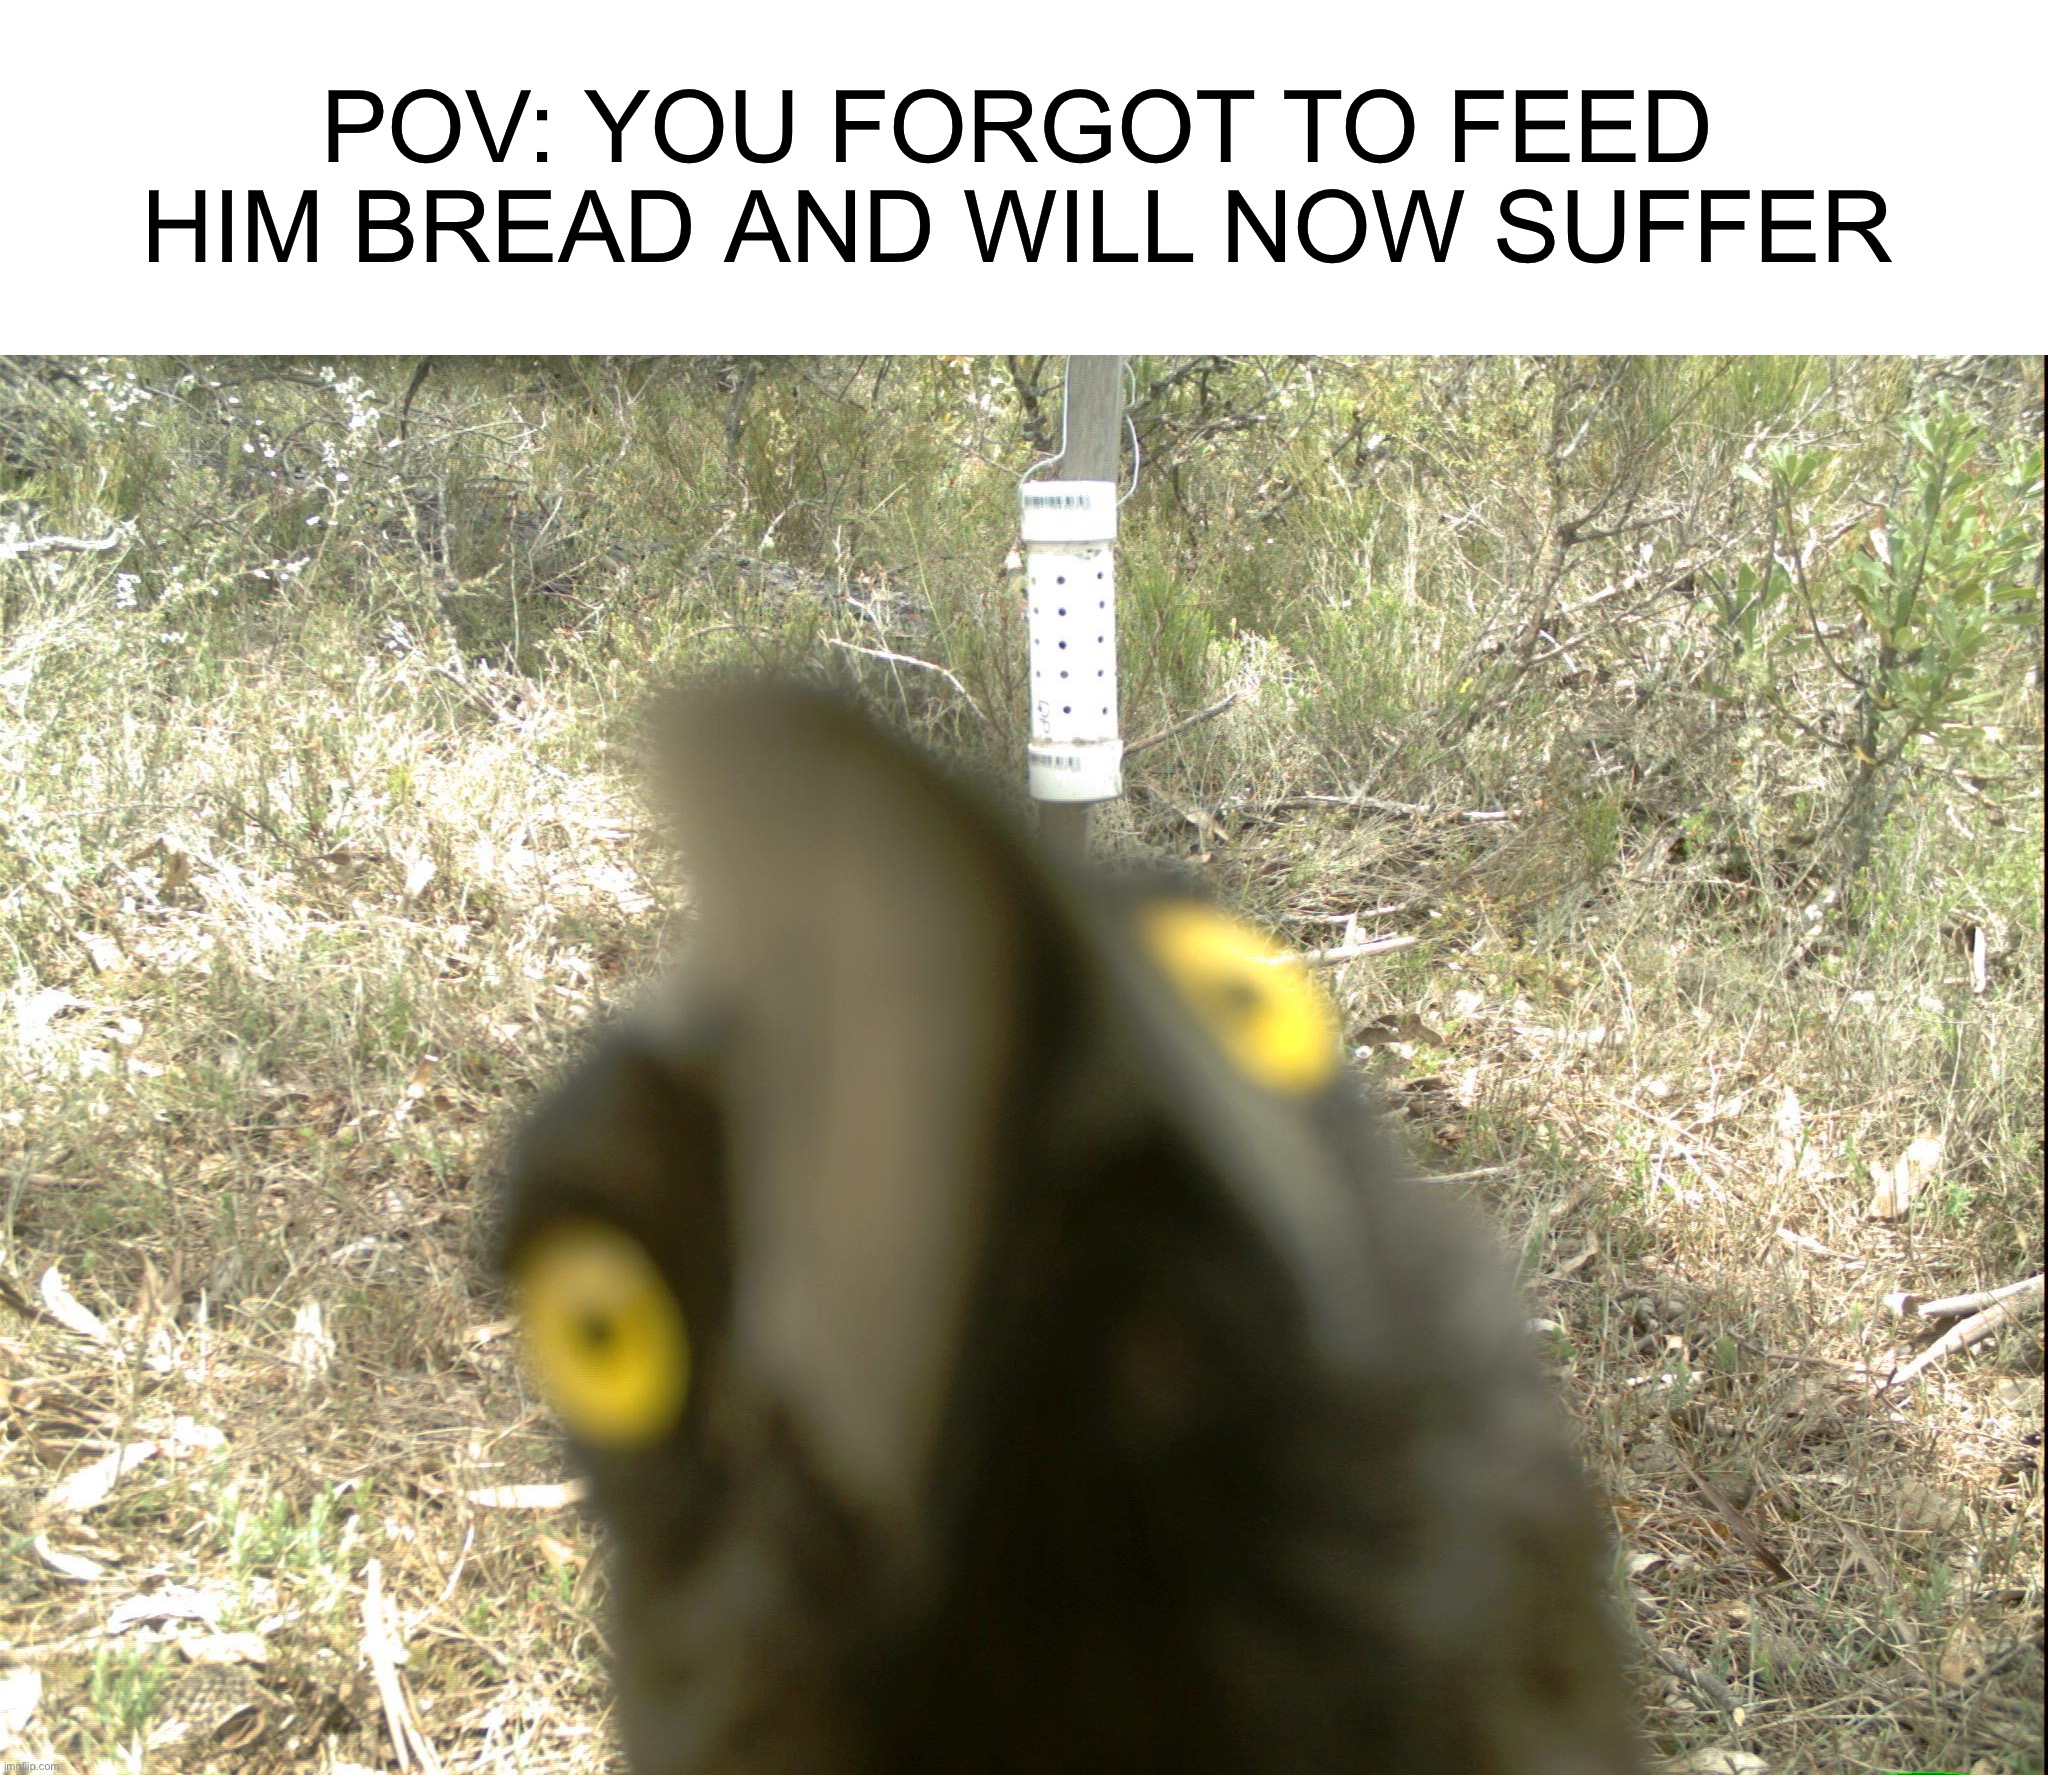 Oh no | POV: YOU FORGOT TO FEED HIM BREAD AND WILL NOW SUFFER | image tagged in memes,funny,oh no,crow,uh oh,bread | made w/ Imgflip meme maker